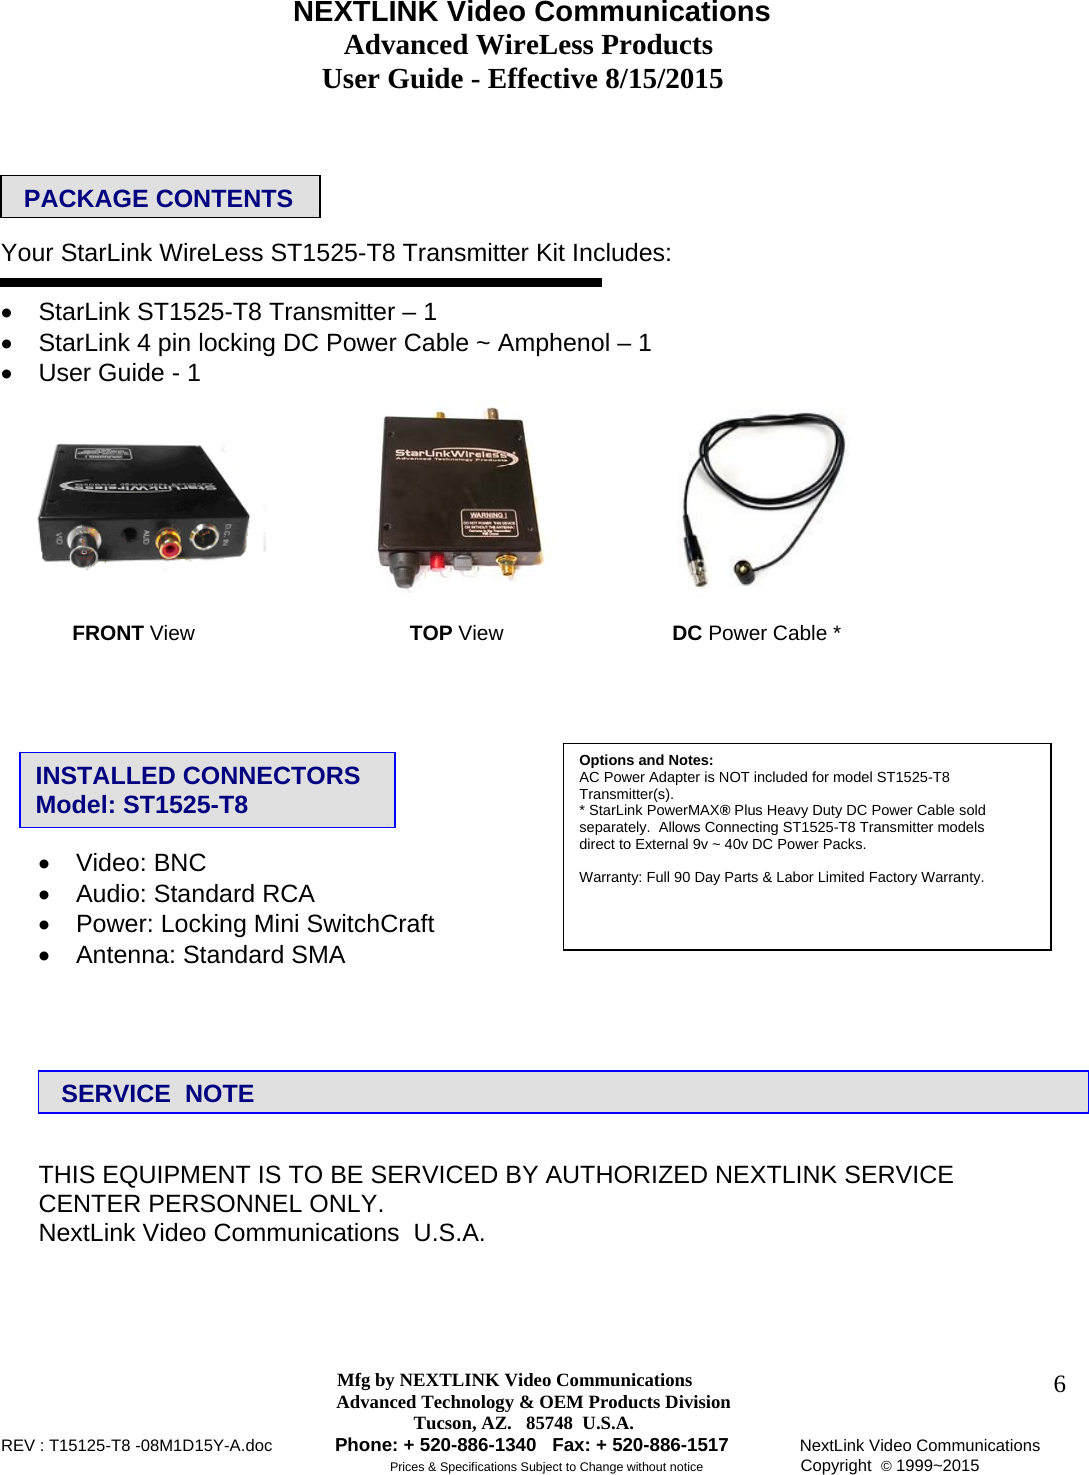                                     NEXTLINK Video Communications                                                 Advanced WireLess Products                                               User Guide - Effective 8/15/2015  Mfg by NEXTLINK Video Communications Advanced Technology &amp; OEM Products Division         Tucson, AZ.   85748  U.S.A. REV : T15125-T8 -08M1D15Y-A.doc         Phone: + 520-886-1340   Fax: + 520-886-1517          NextLink Video Communications                                                         Prices &amp; Specifications Subject to Change without notice              Copyright  © 1999~2015      6    Your StarLink WireLess ST1525-T8 Transmitter Kit Includes:     StarLink ST1525-T8 Transmitter – 1    StarLink 4 pin locking DC Power Cable ~ Amphenol – 1    User Guide - 1                   Video: BNC     Audio: Standard RCA    Power: Locking Mini SwitchCraft    Antenna: Standard SMA         THIS EQUIPMENT IS TO BE SERVICED BY AUTHORIZED NEXTLINK SERVICE  CENTER PERSONNEL ONLY.  NextLink Video Communications  U.S.A.  PACKAGE CONTENTS     FRONT View   TOP View   DC Power Cable * INSTALLED CONNECTORS    Model: ST1525-T8  SERVICE  NOTE Options and Notes:  AC Power Adapter is NOT included for model ST1525-T8 Transmitter(s).  * StarLink PowerMAX® Plus Heavy Duty DC Power Cable sold separately.  Allows Connecting ST1525-T8 Transmitter models  direct to External 9v ~ 40v DC Power Packs.    Warranty: Full 90 Day Parts &amp; Labor Limited Factory Warranty.  